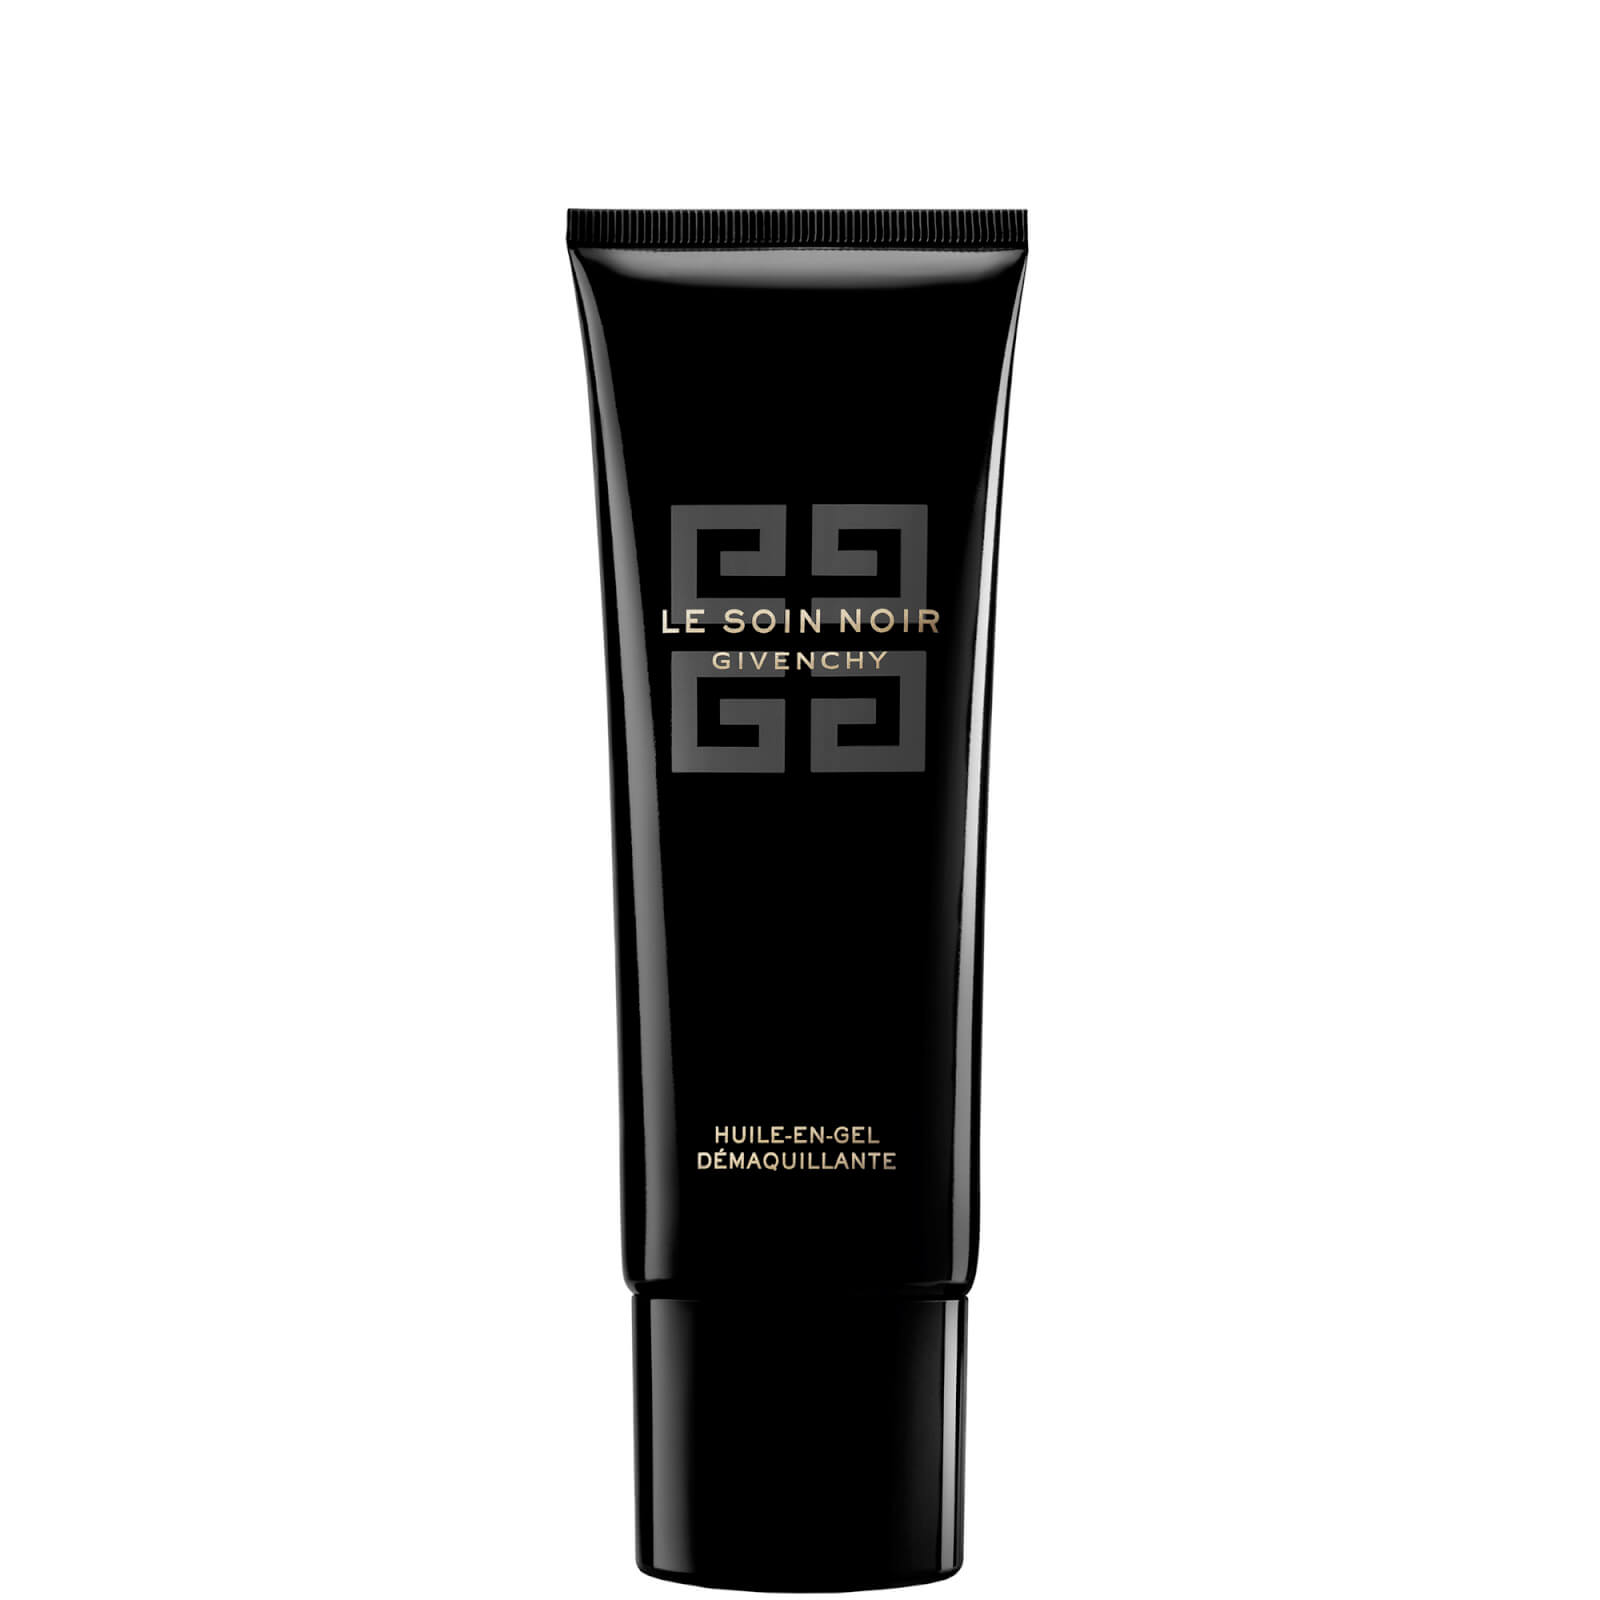 Givenchy Le Soin Noir Oil-in-gel Makeup Remover 125ml